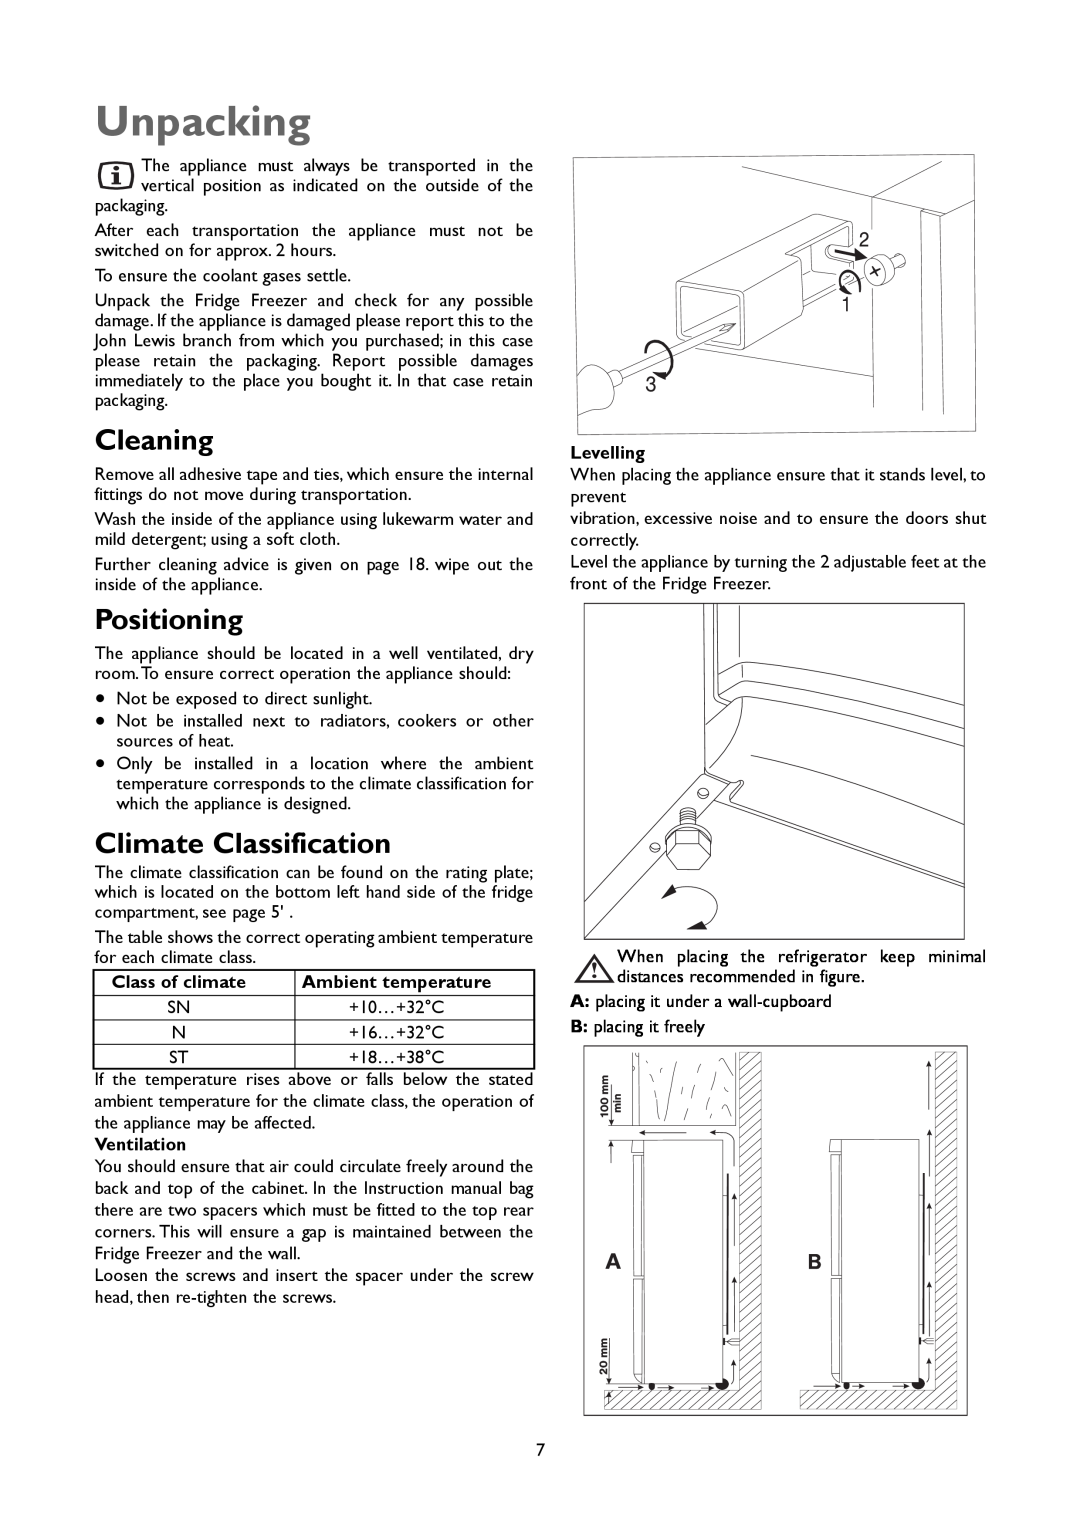 John Lewis JLFFW1803 instruction manual Unpacking, Cleaning, Positioning, Climate Classification 